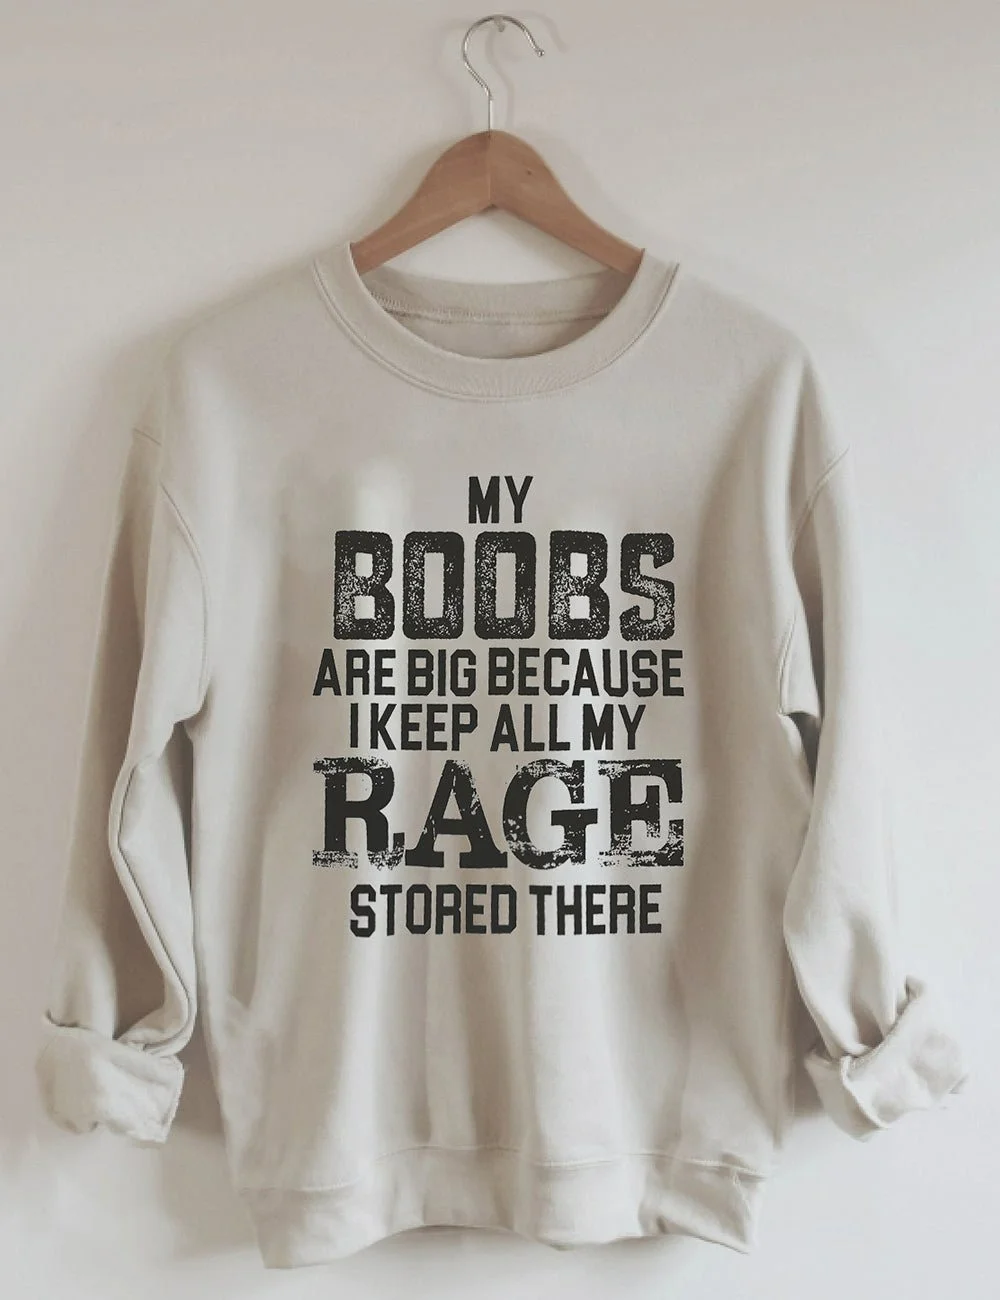 My Boobs Are Big Because I Keep All My Rage Stored There Sweatshirt